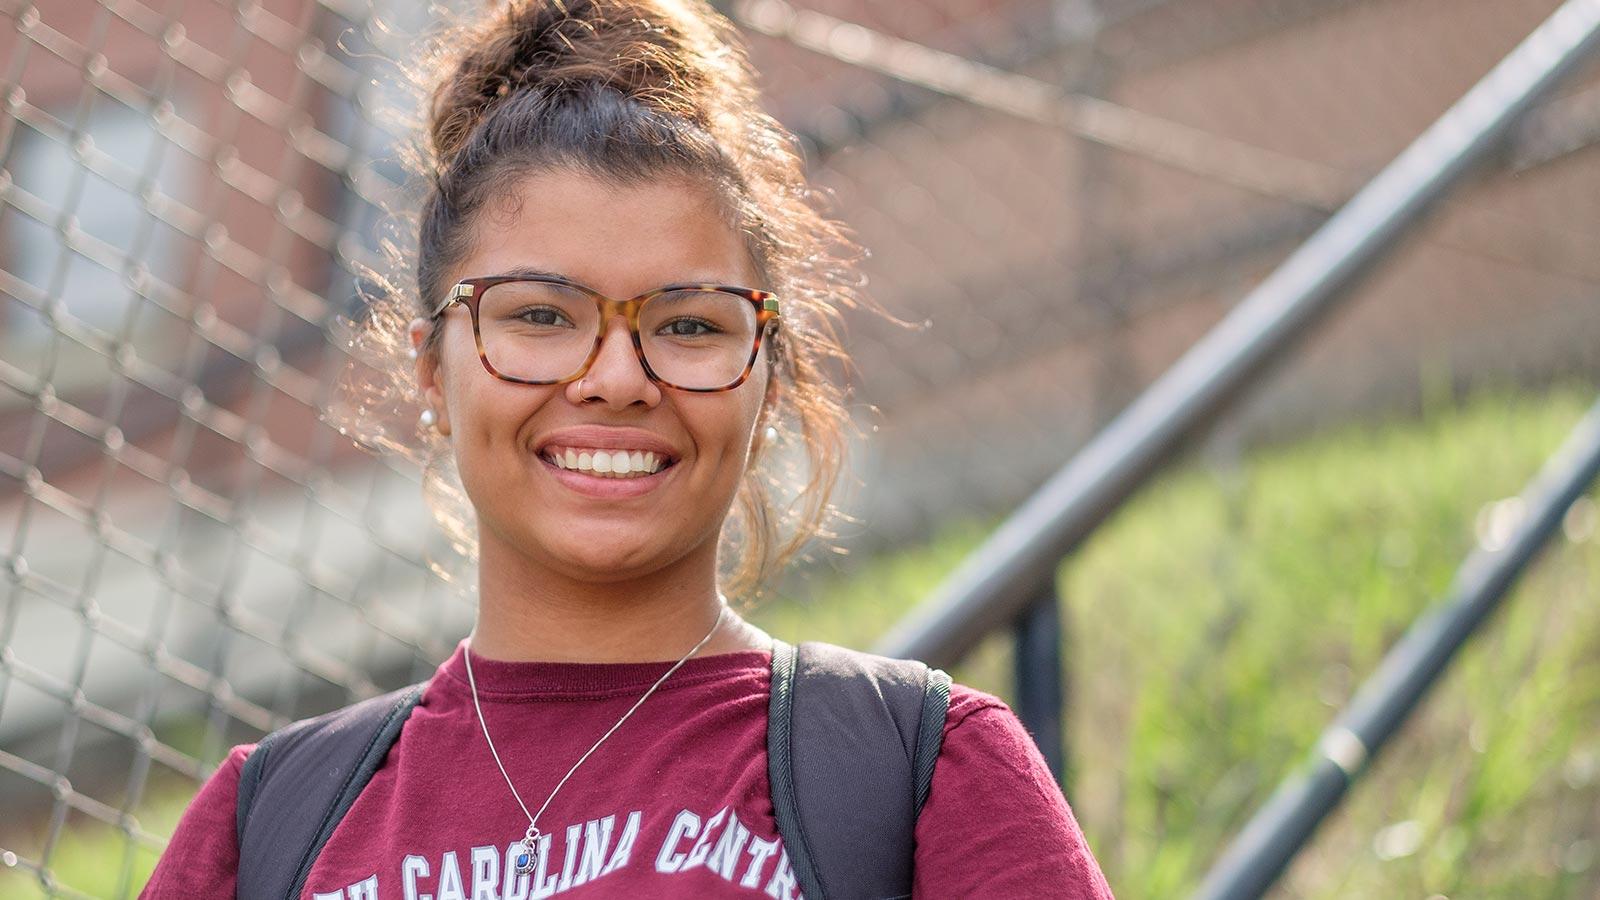 NCCU student with glasses, smiling